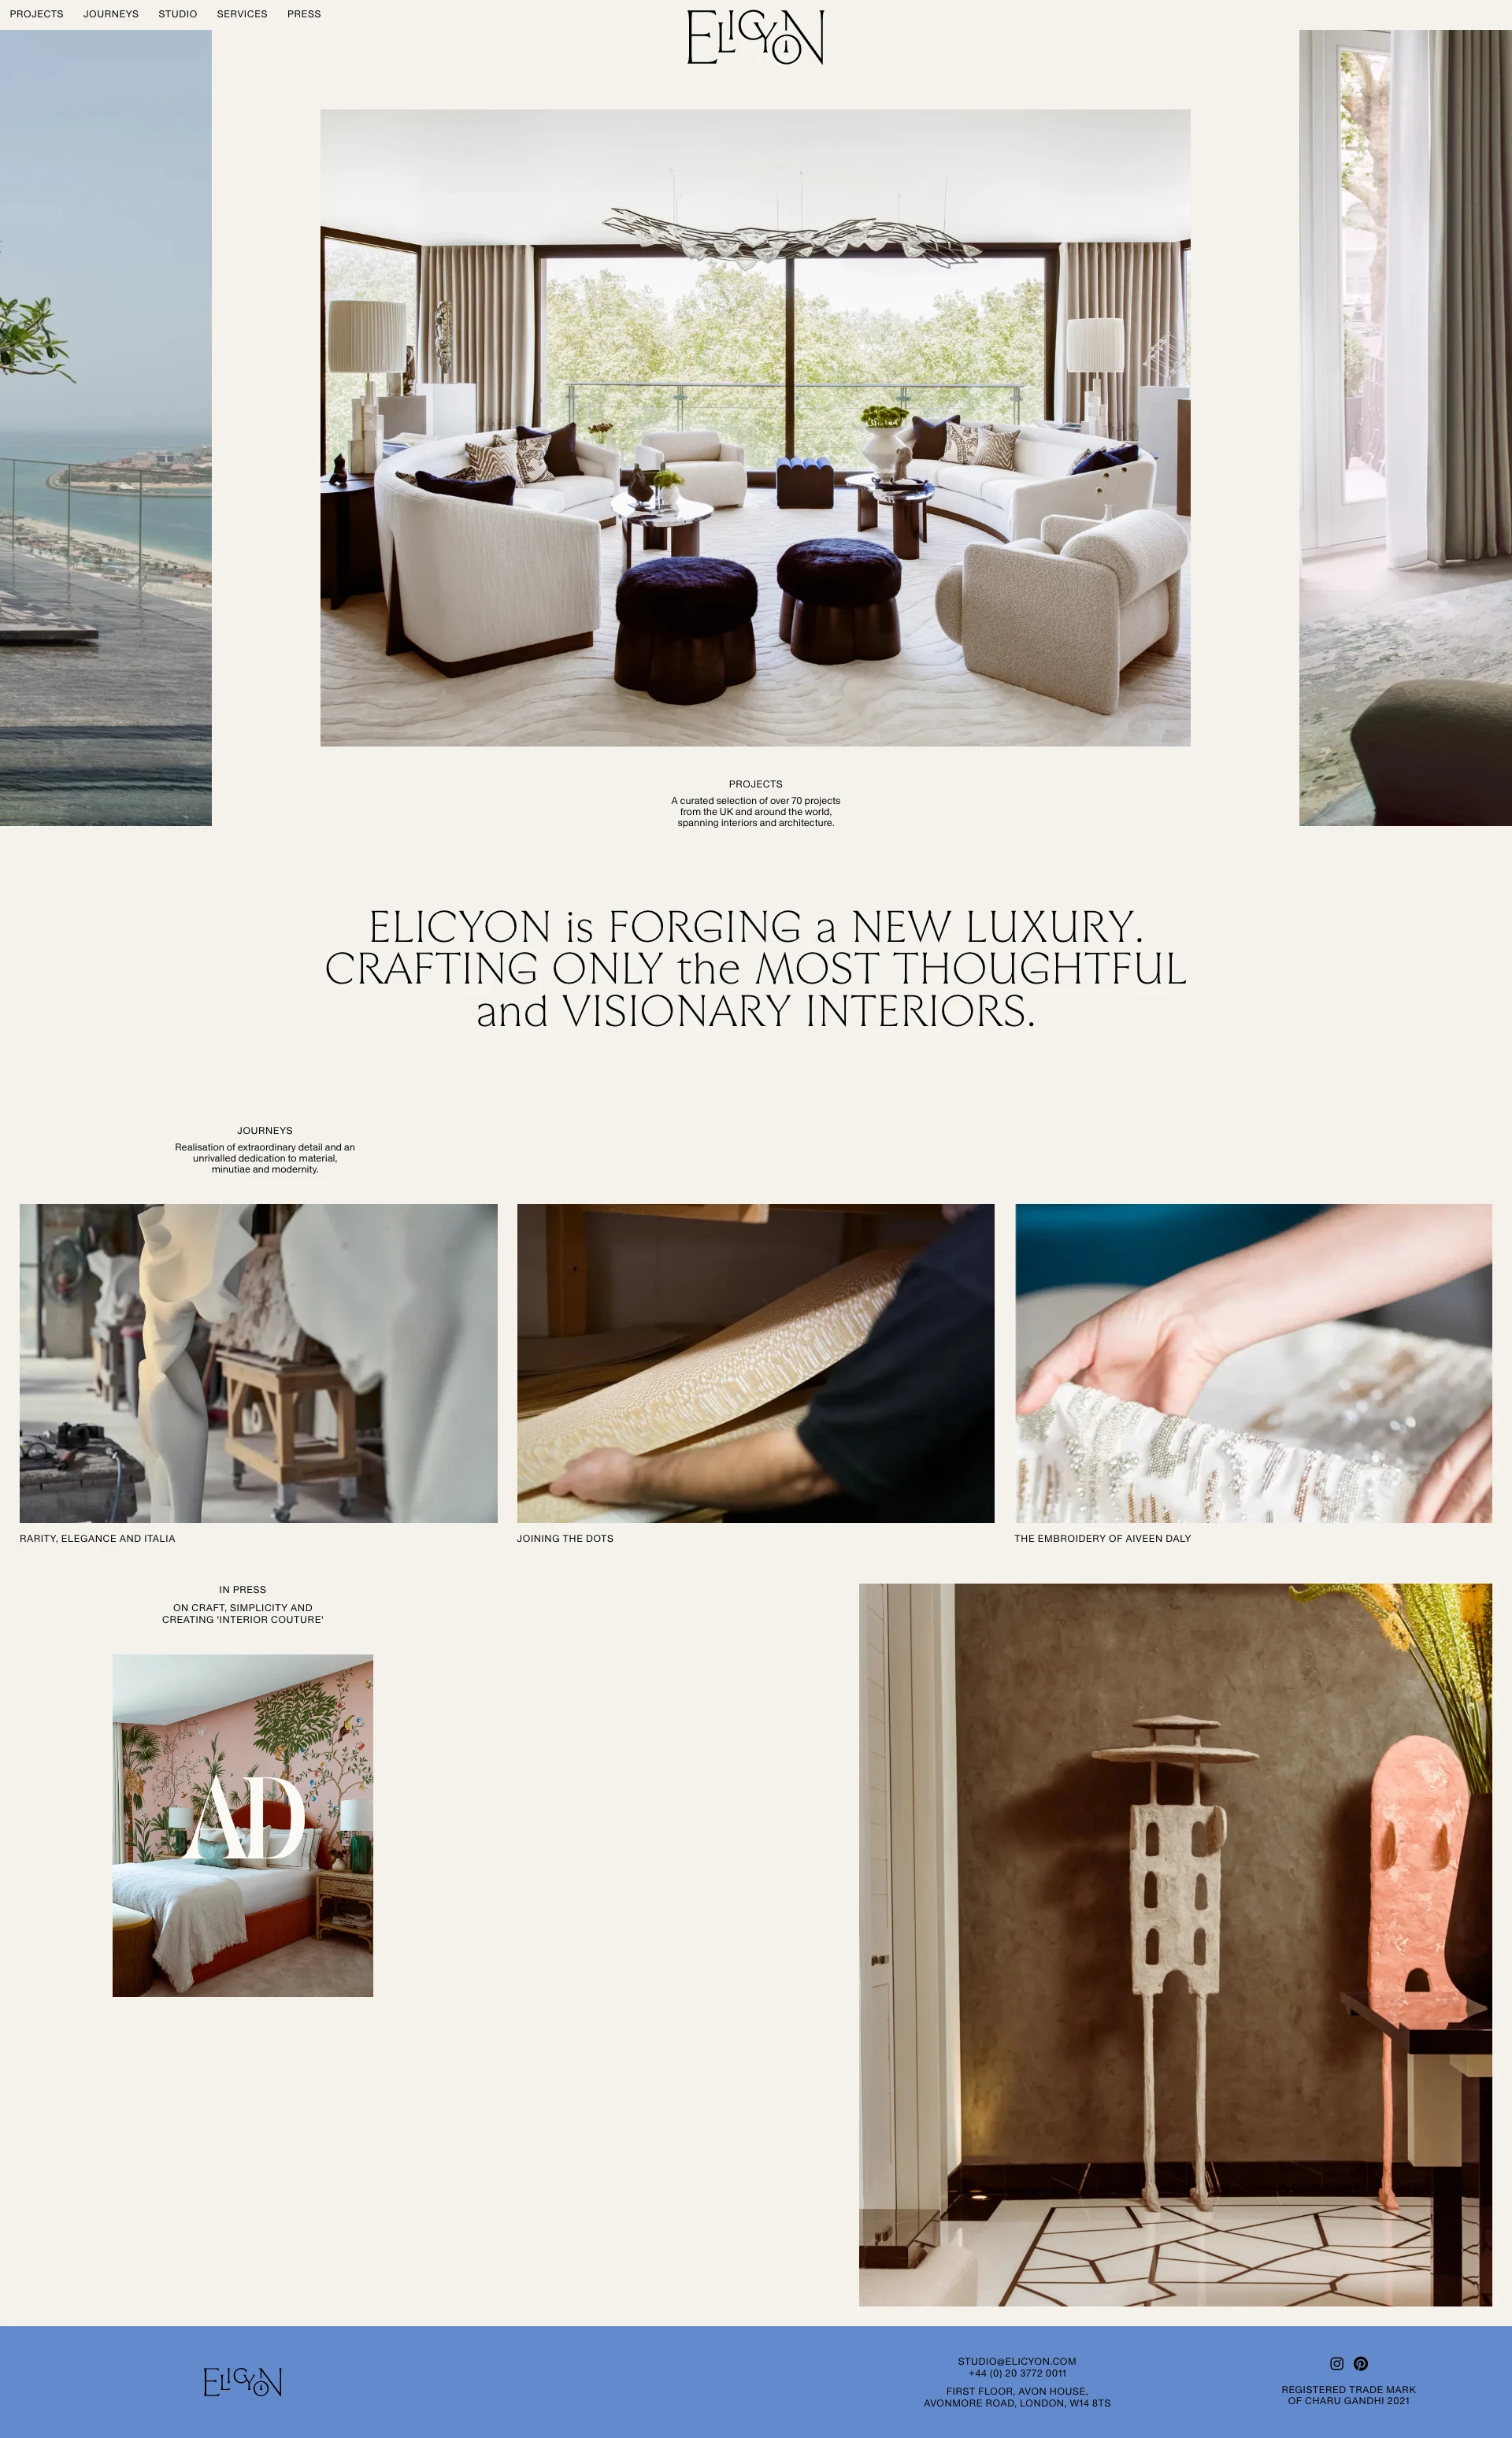 Elicyon Landing Page Example: Elicyon is forging a new luxury. Crafting only the most thoughtful and visionary interiors, we pride ourselves on the perennial realisation of extraordinary detail and an unrivaled dedication to material, minutiae and modernity. Based In West Kensington, London. 